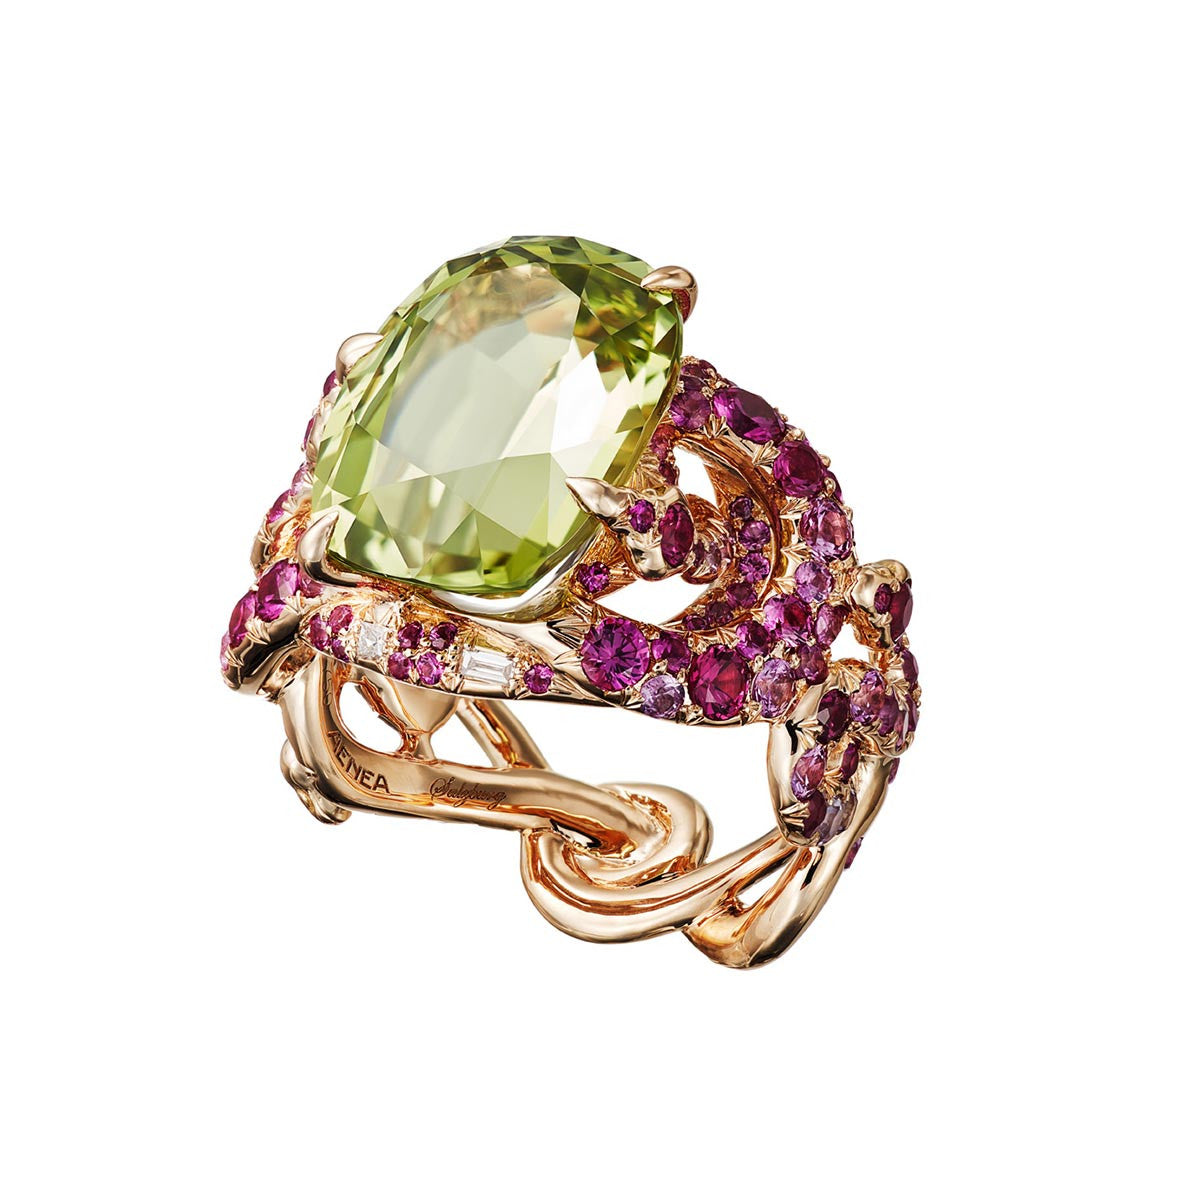 Ring "4 Snakes" Pink Gold with a Green Chrysoberyll, Pink Sapphires and White Diamonds